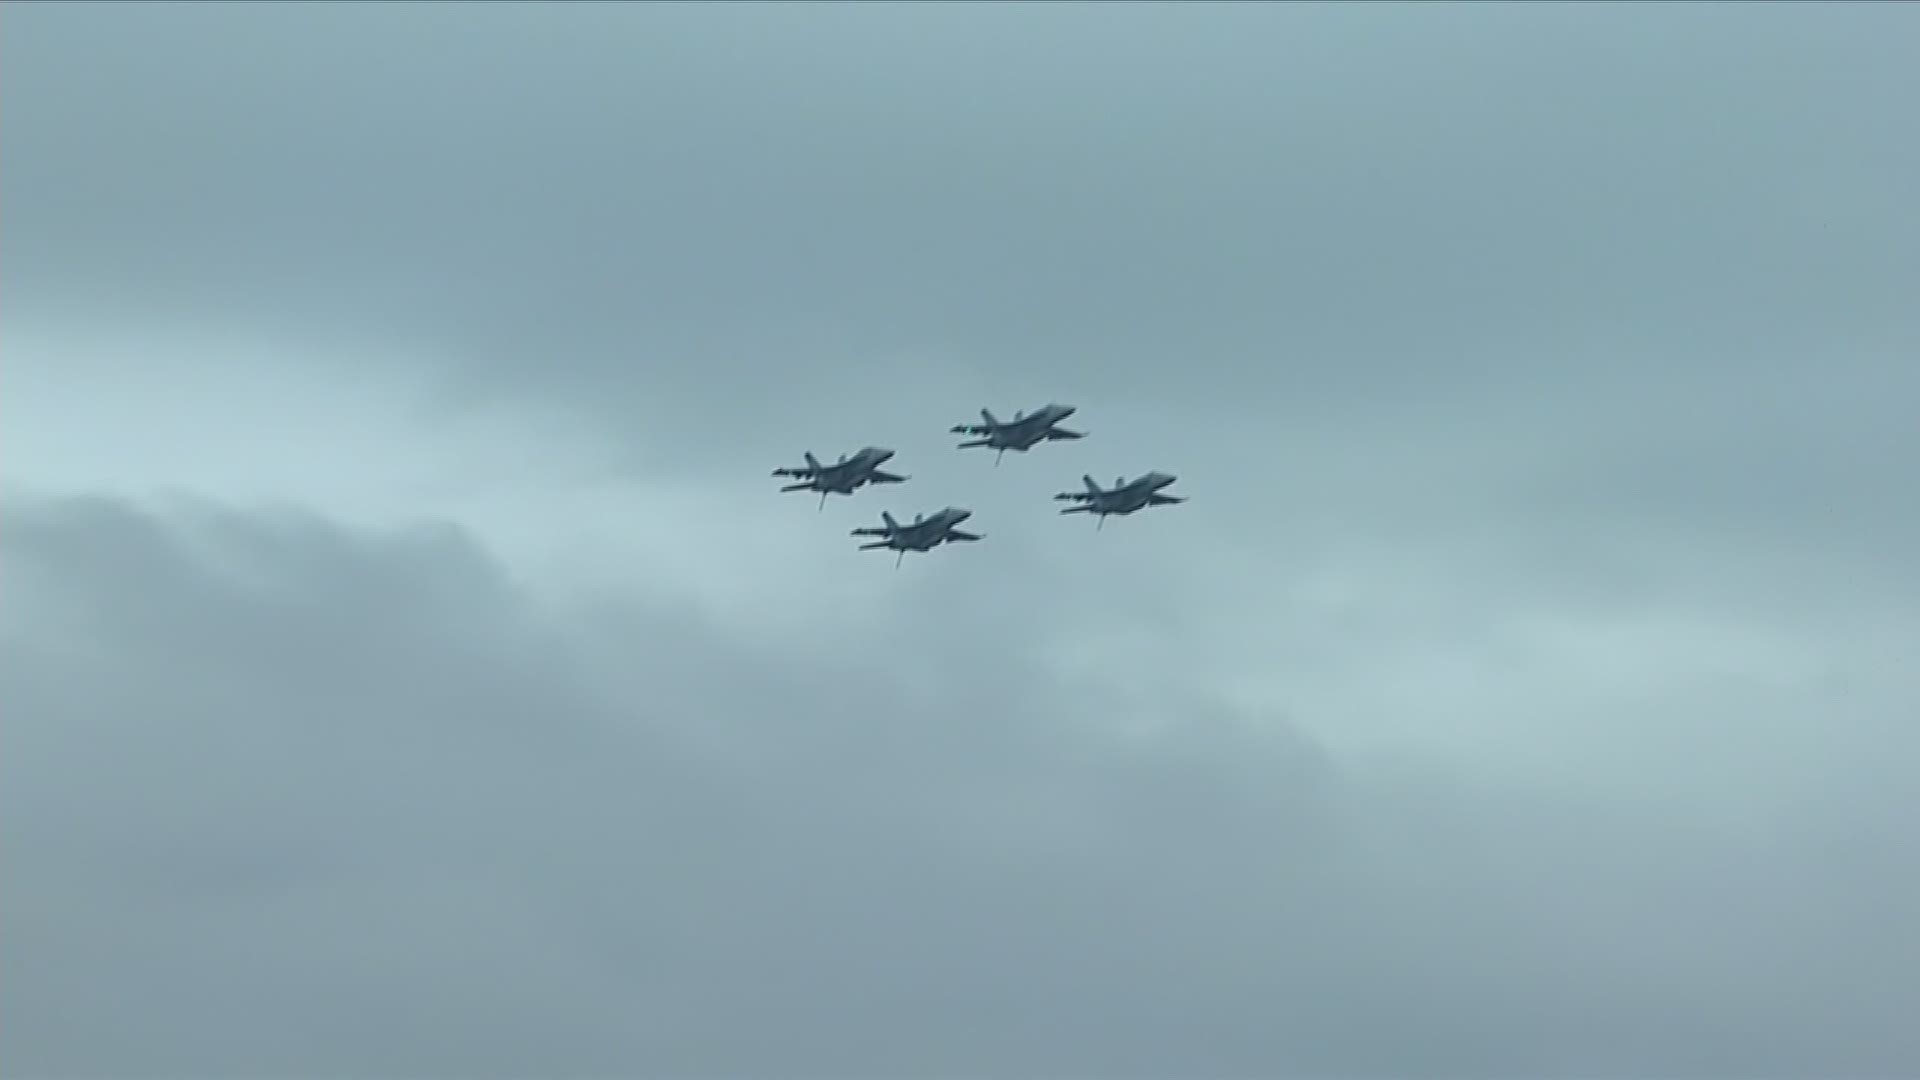 The 21 Aircraft Missing Man Flyover is one of the highest honors a Naval aviator can receive. George H.W. Bush was just 18 years old when he joined the Navy and served in WWII.